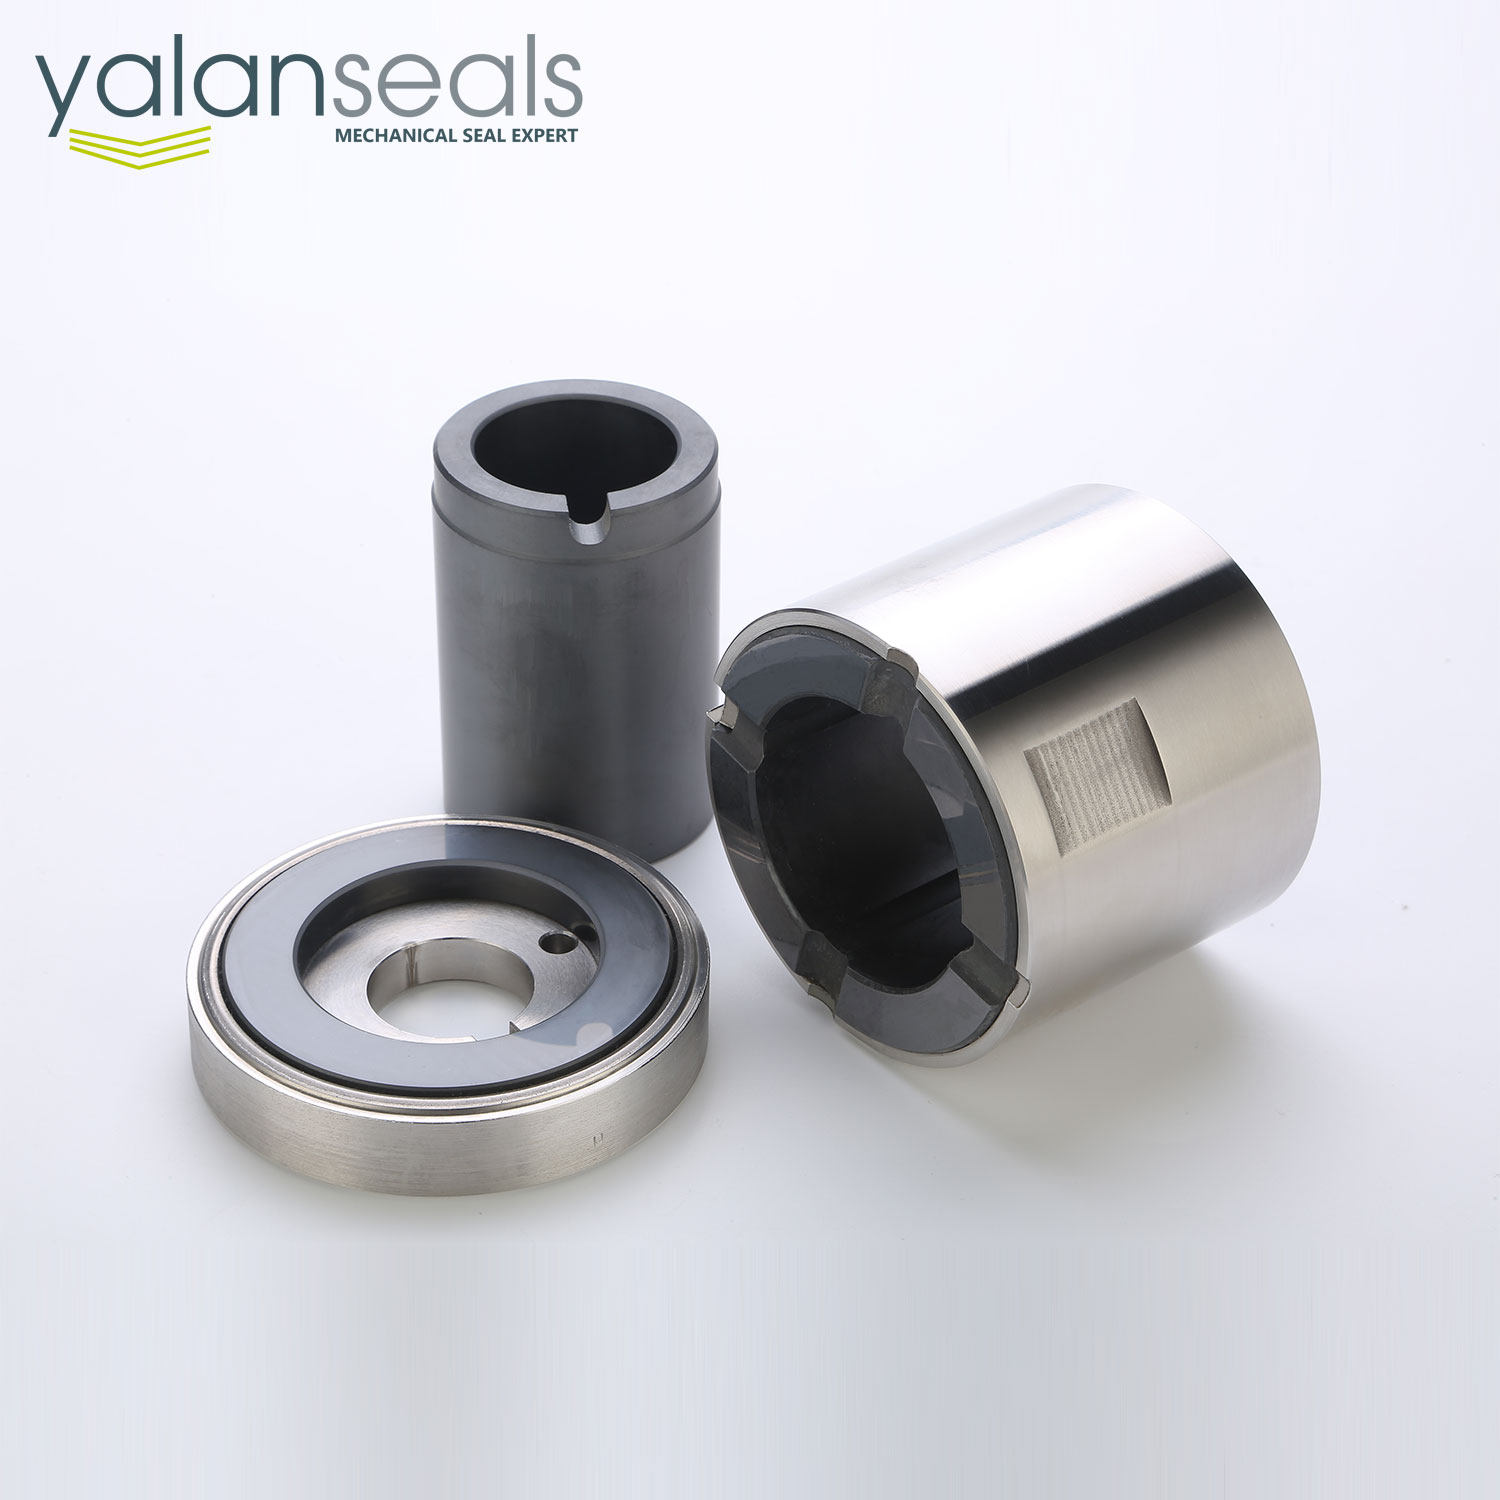 YALAN PB03 Shaft Sleeve and Bearing Cartridge Component for Canned Motor Pumps